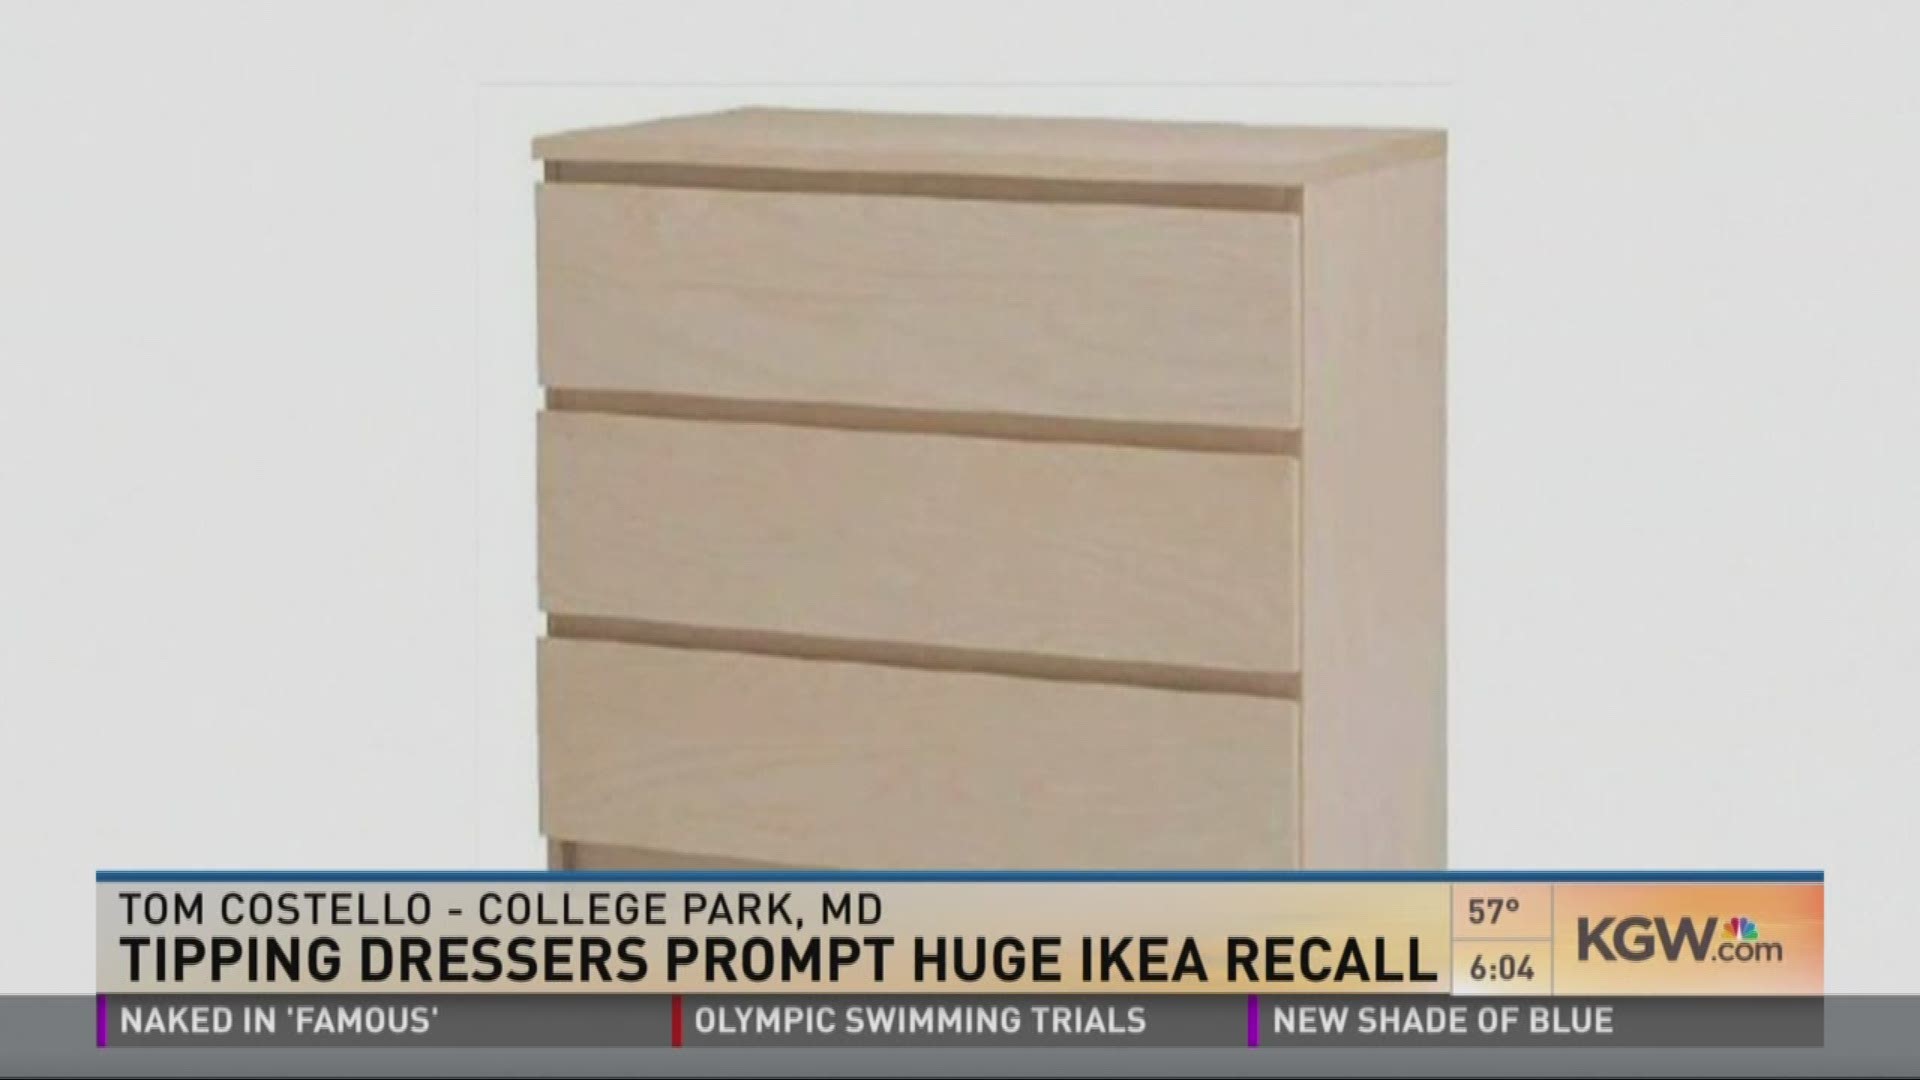 Tipping dressers prompt huge Ikea recall